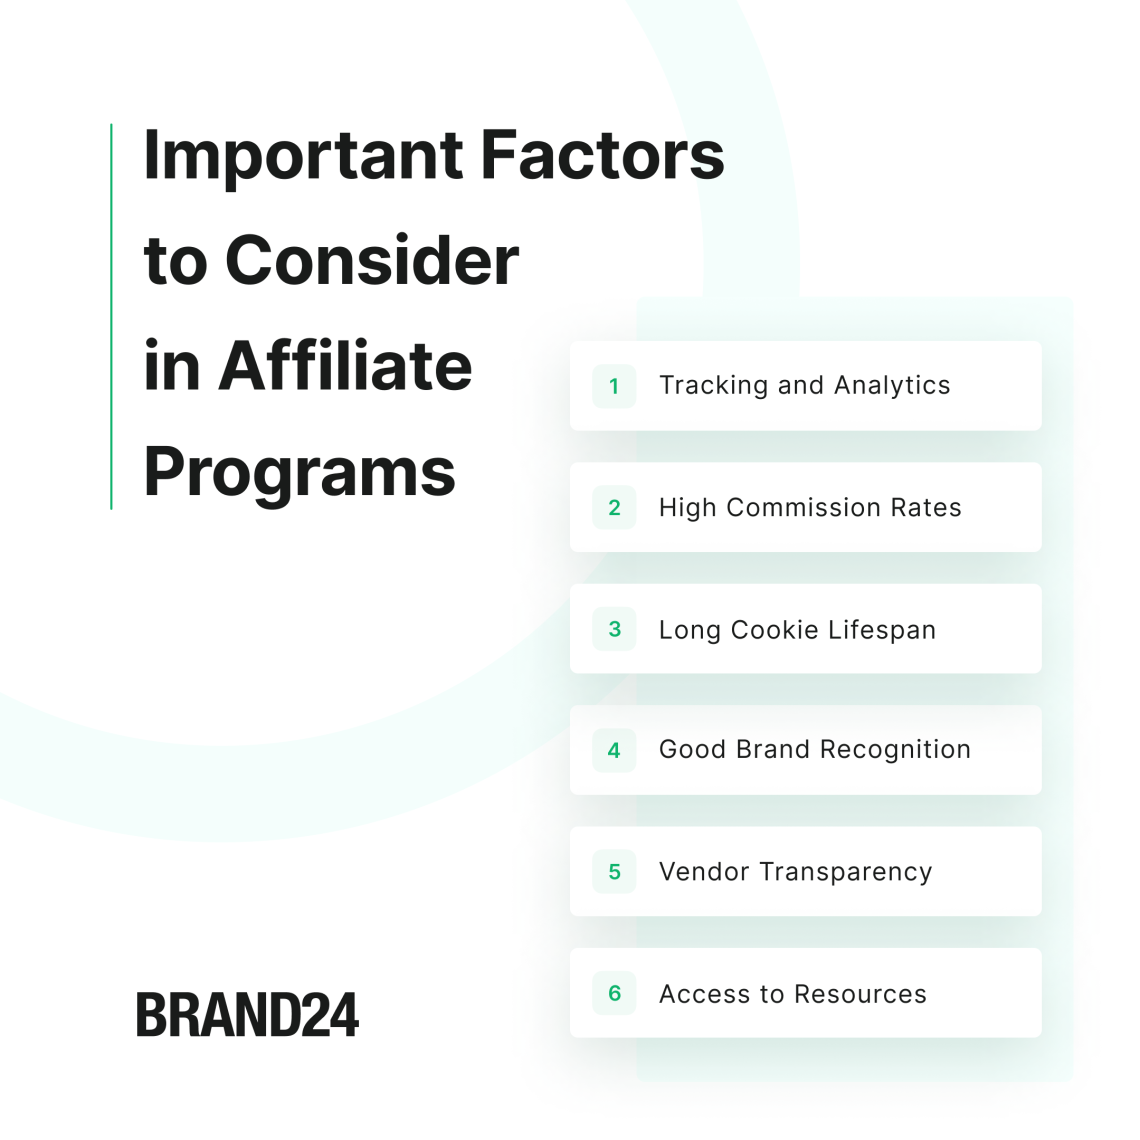 Important Factors to Consider in Affiliate Programs